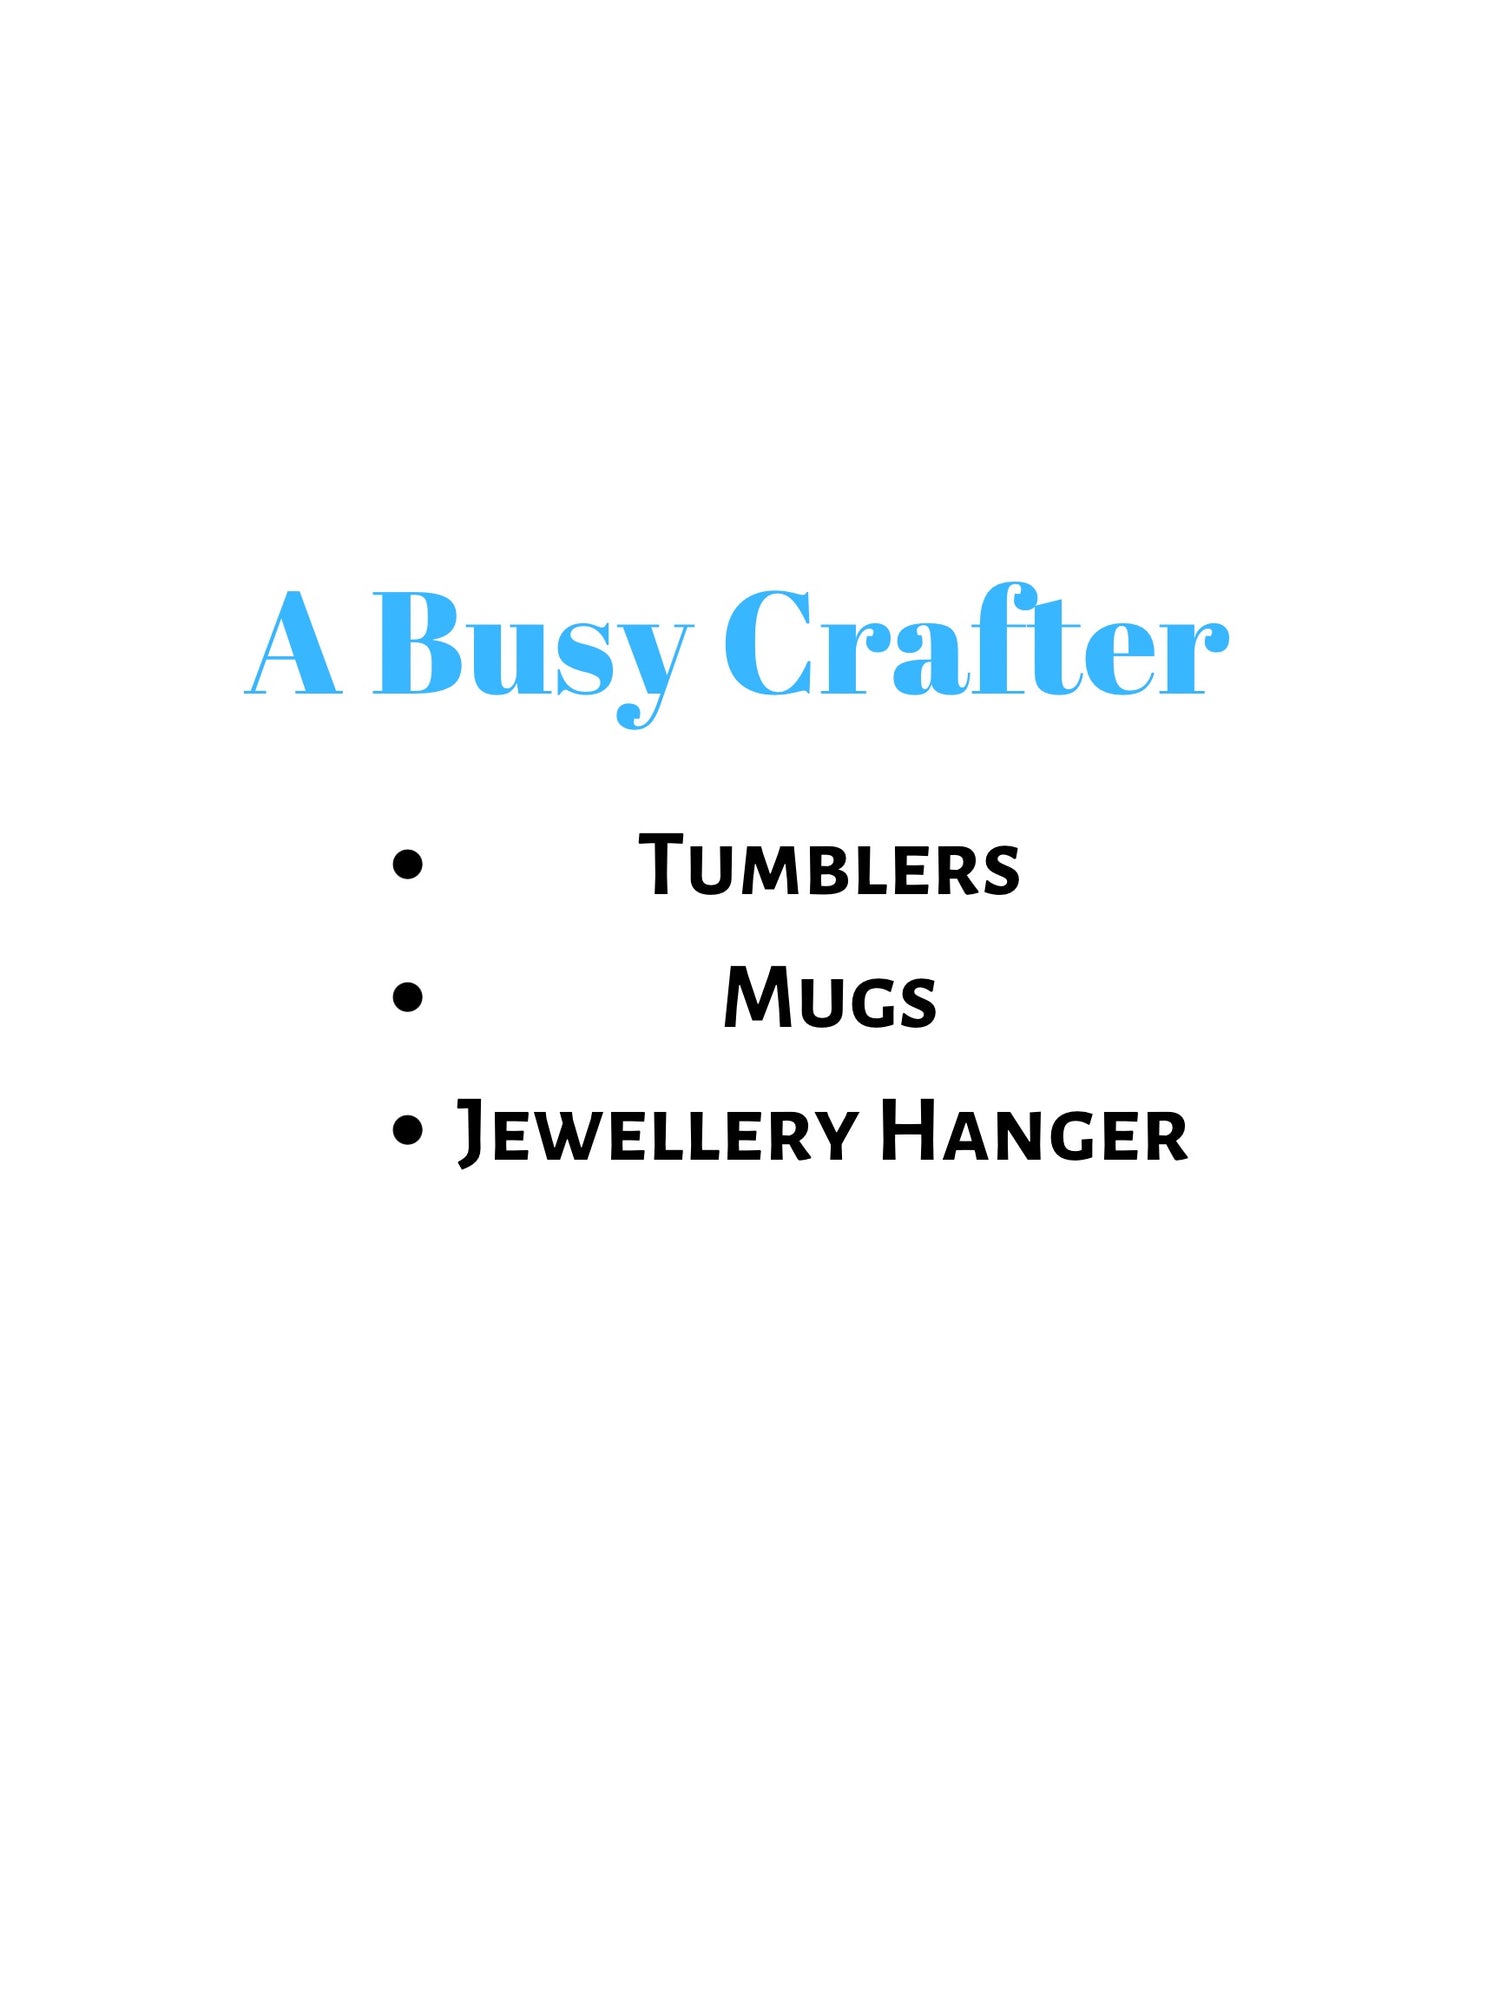 A Busy Crafter